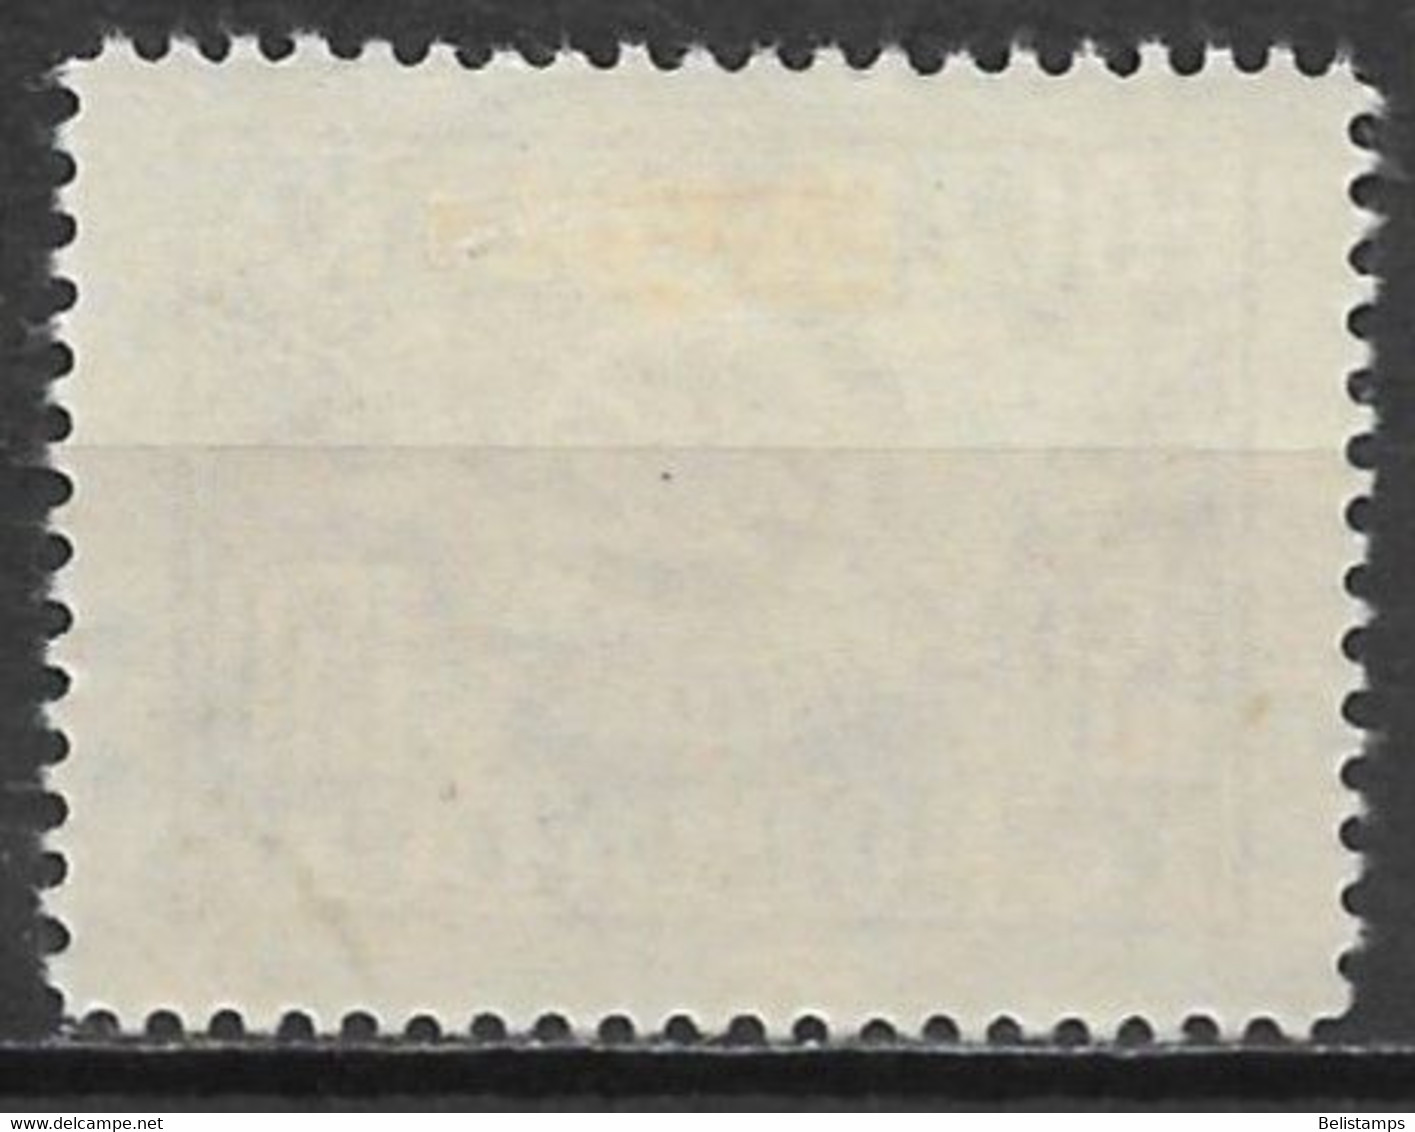 Poland 1949. Scott #J115 (U) Post Horn With Thunderbolts - Postage Due